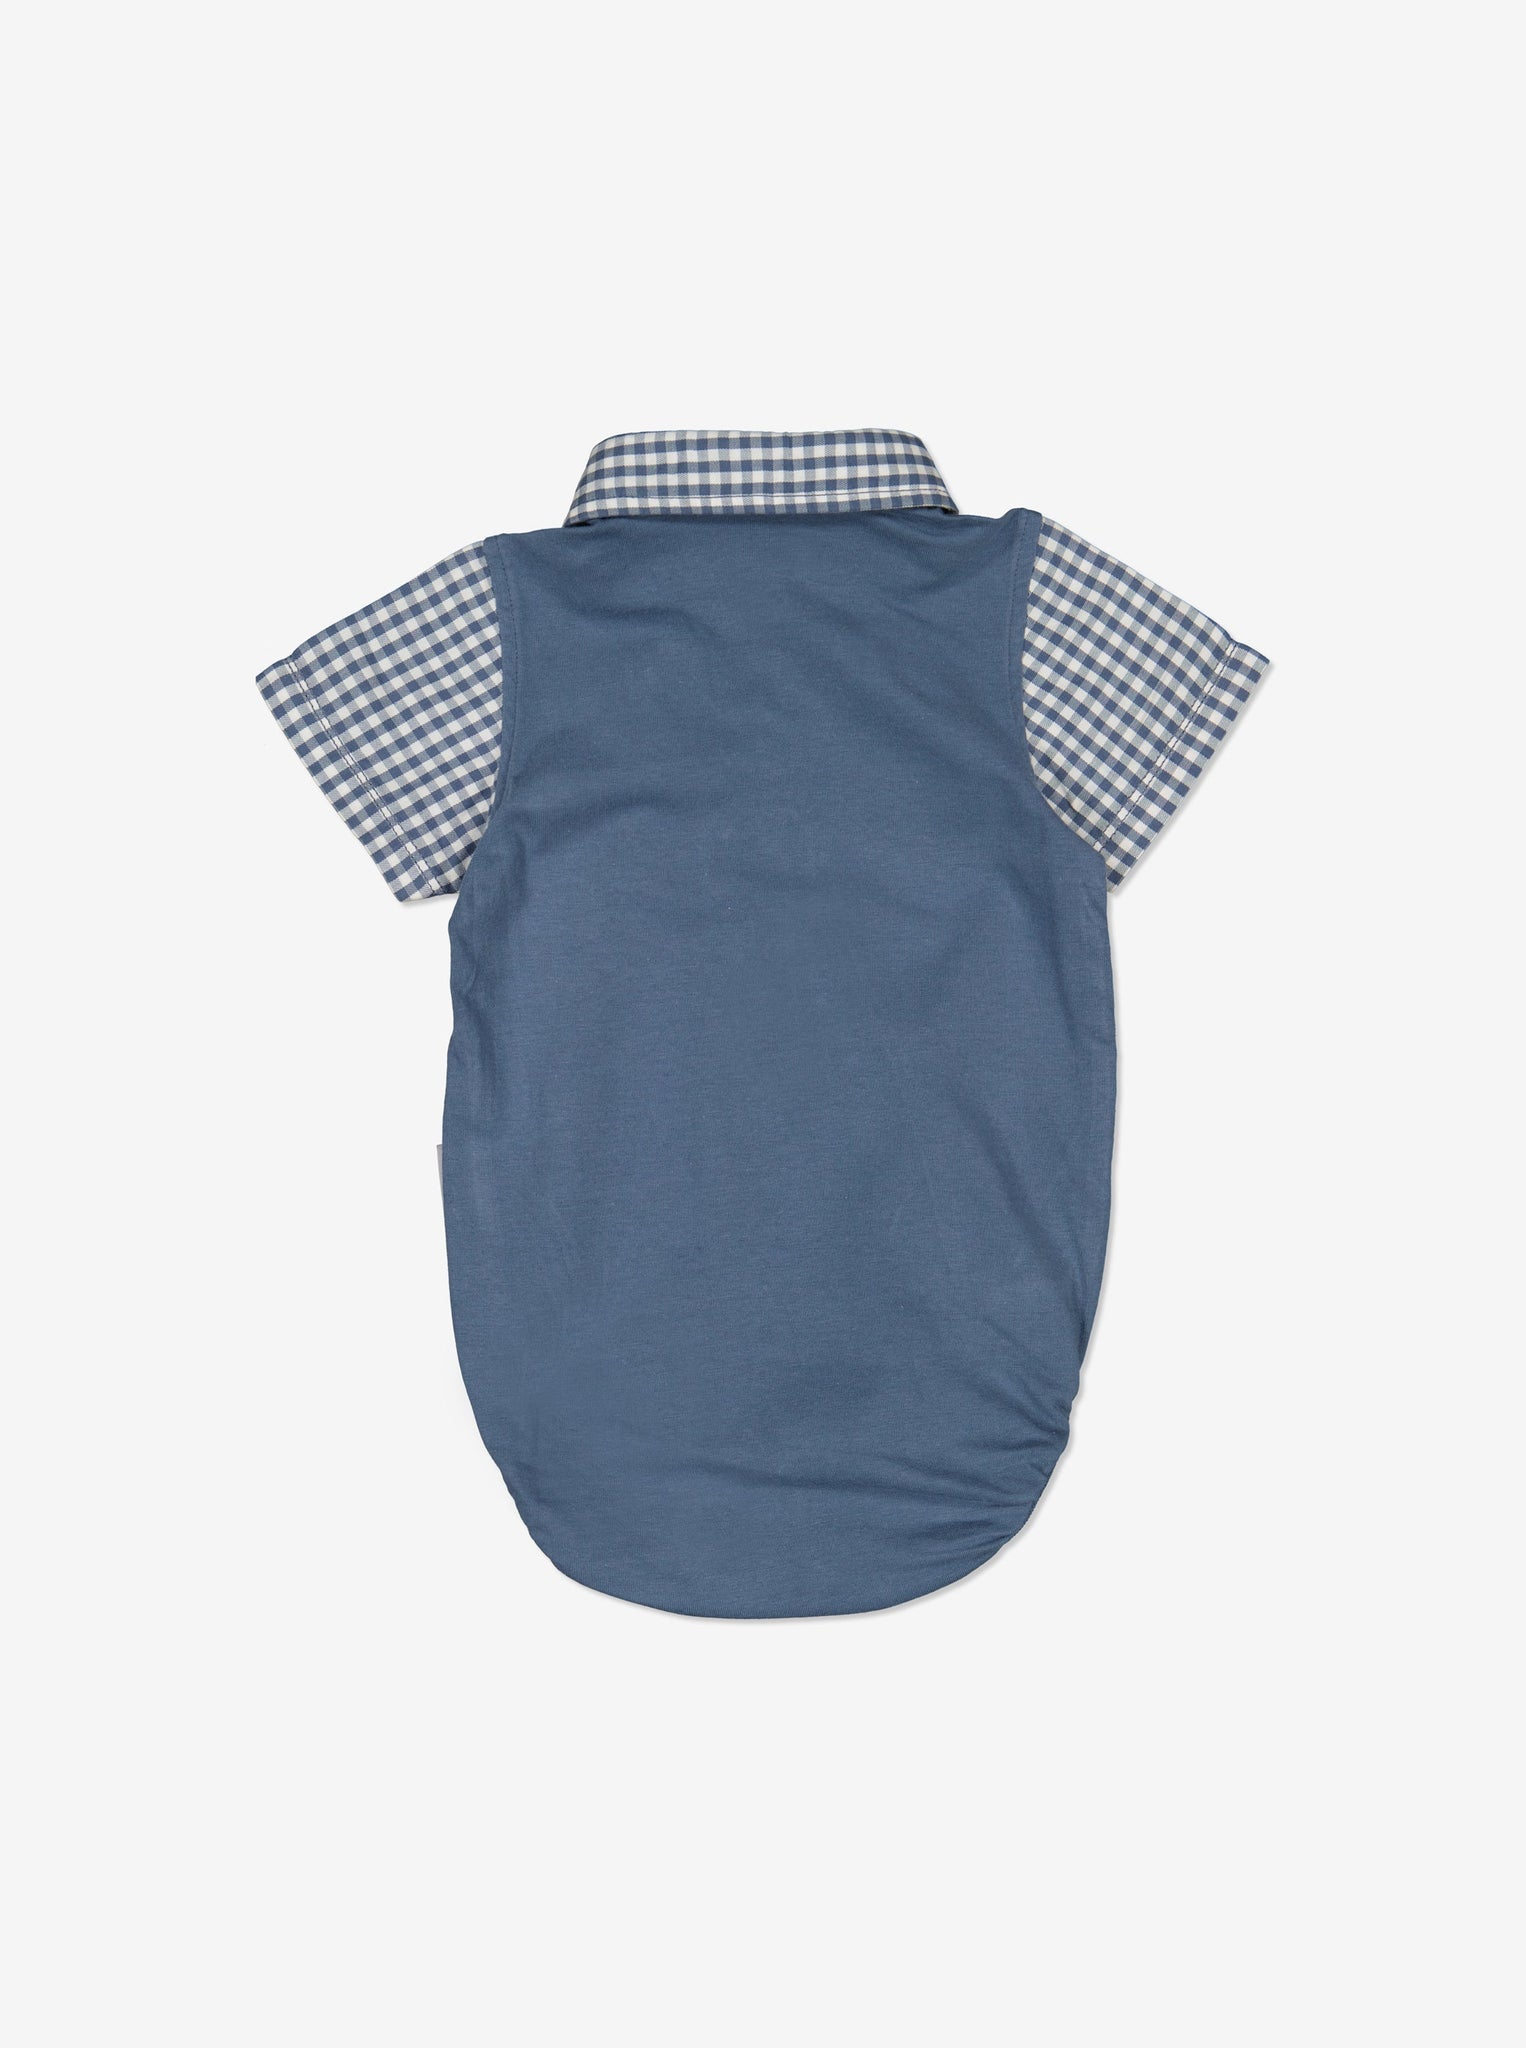 Blue Checked Newborn Babygrow Shirt from Polarn O. Pyret Kidswear. Made from ethically sourced materials.